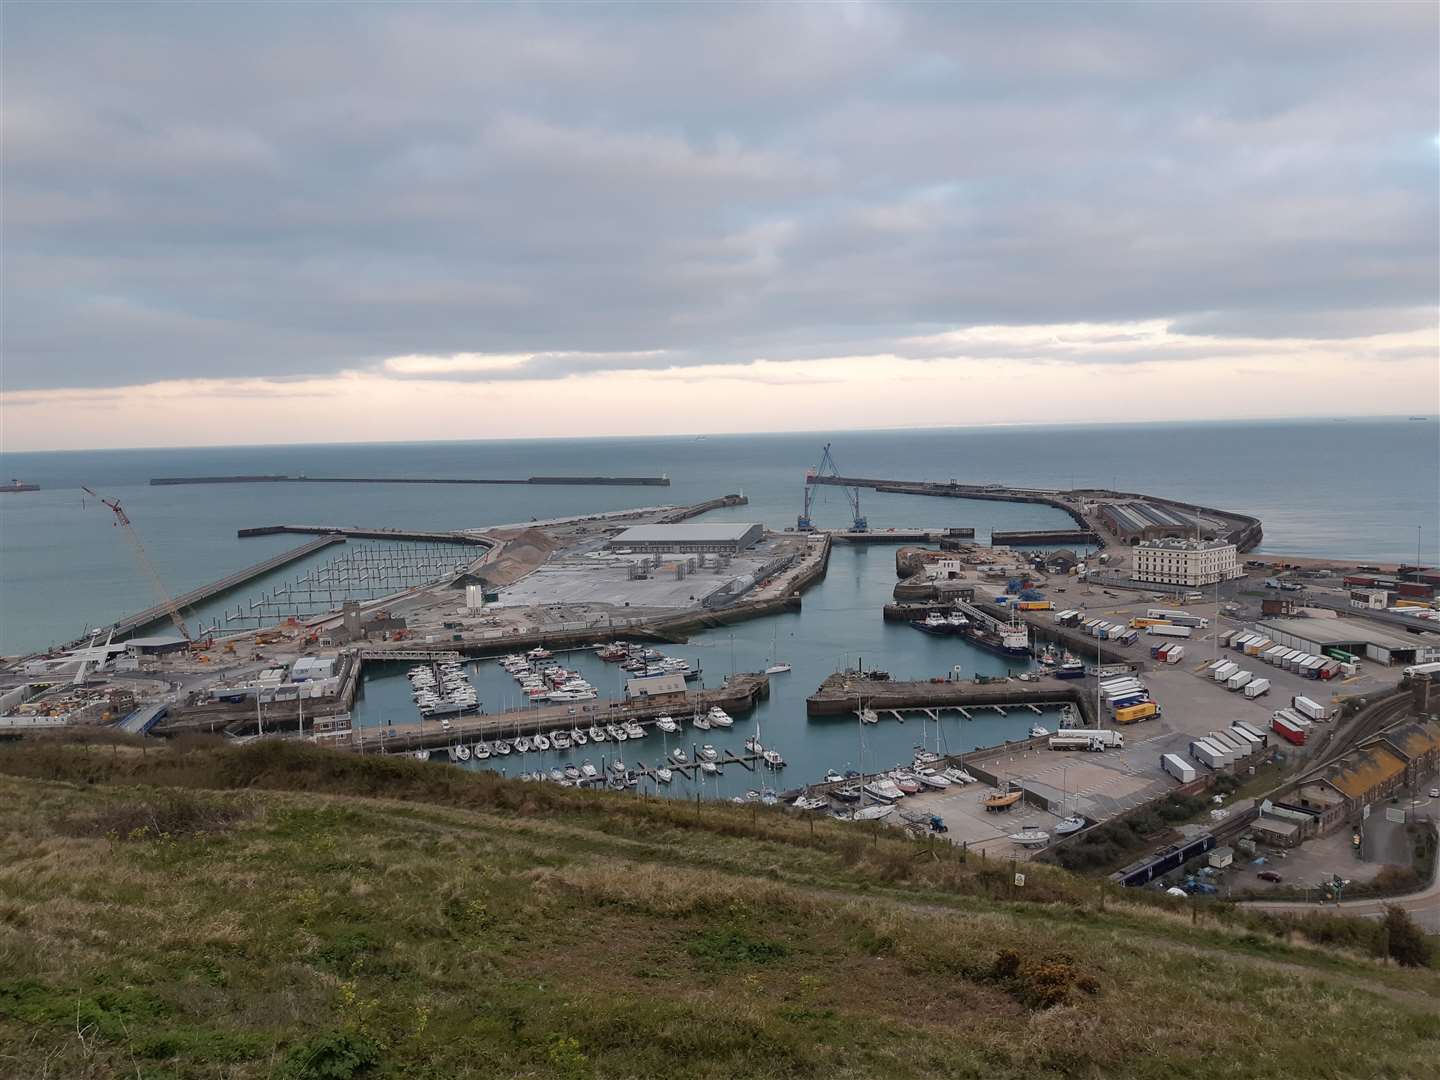 The 27 migrants were brought to Dover